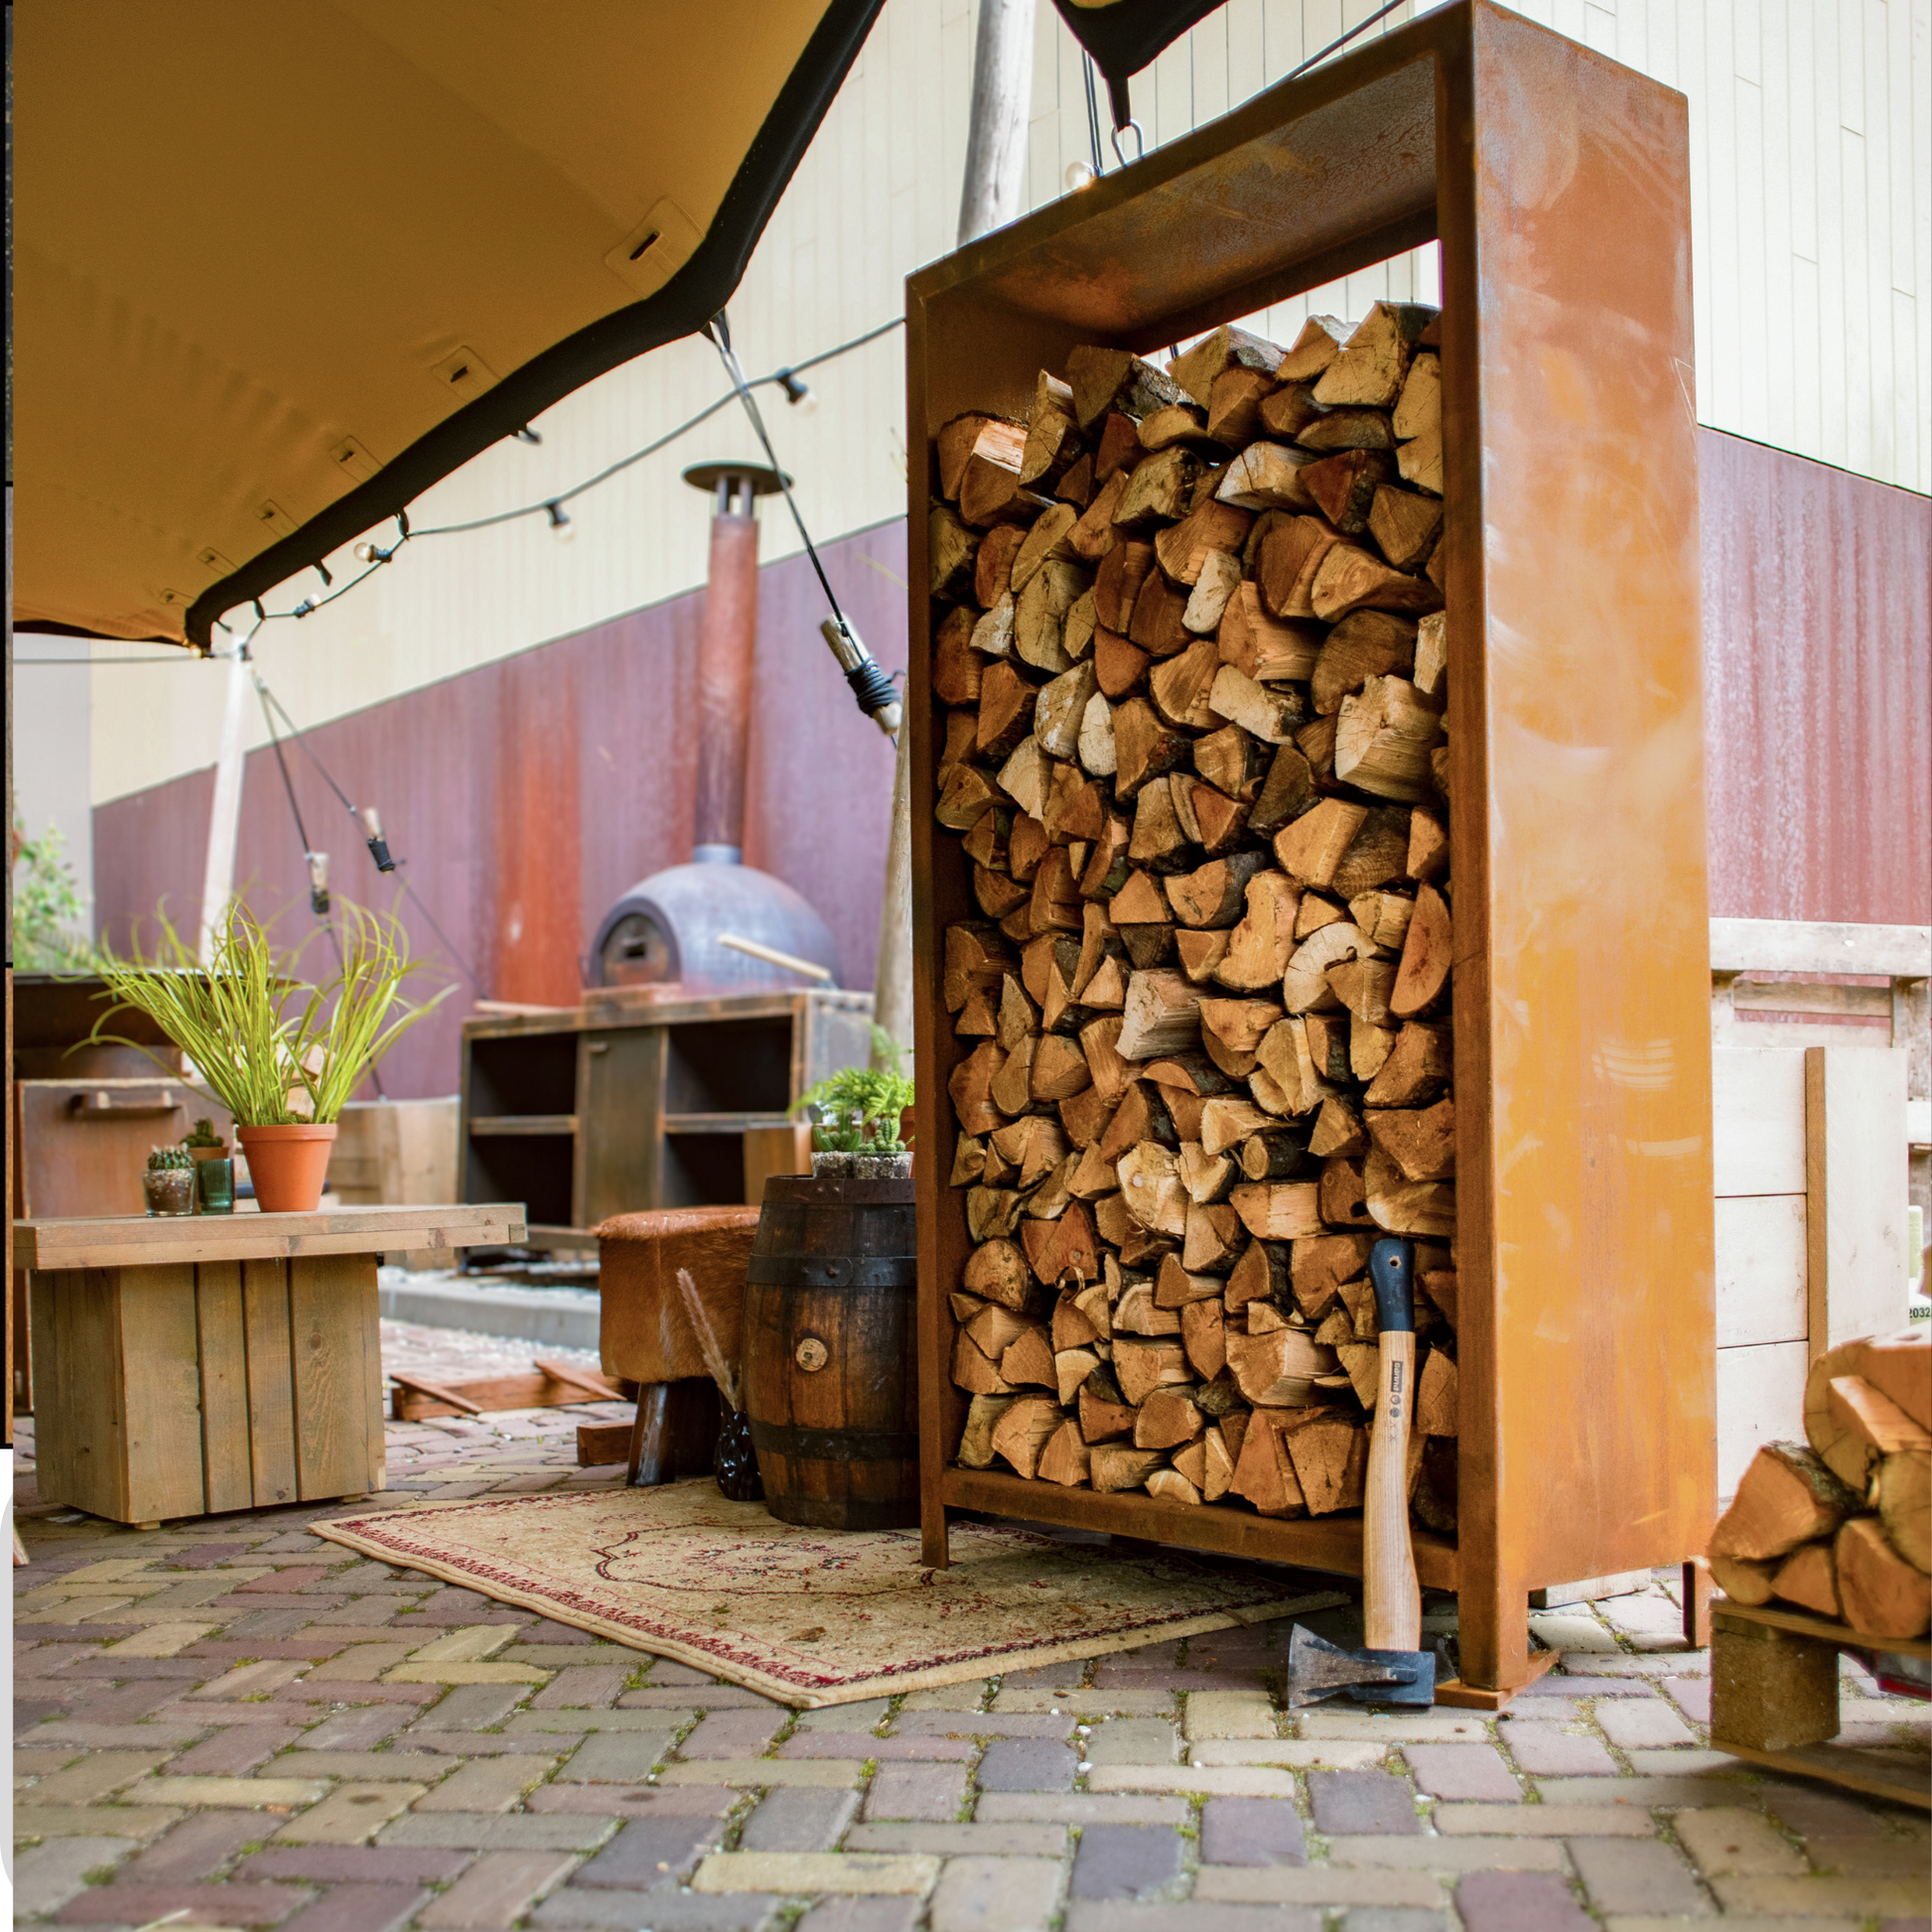 Outdoor Log Storage: Logs stacked and organised for easy access.